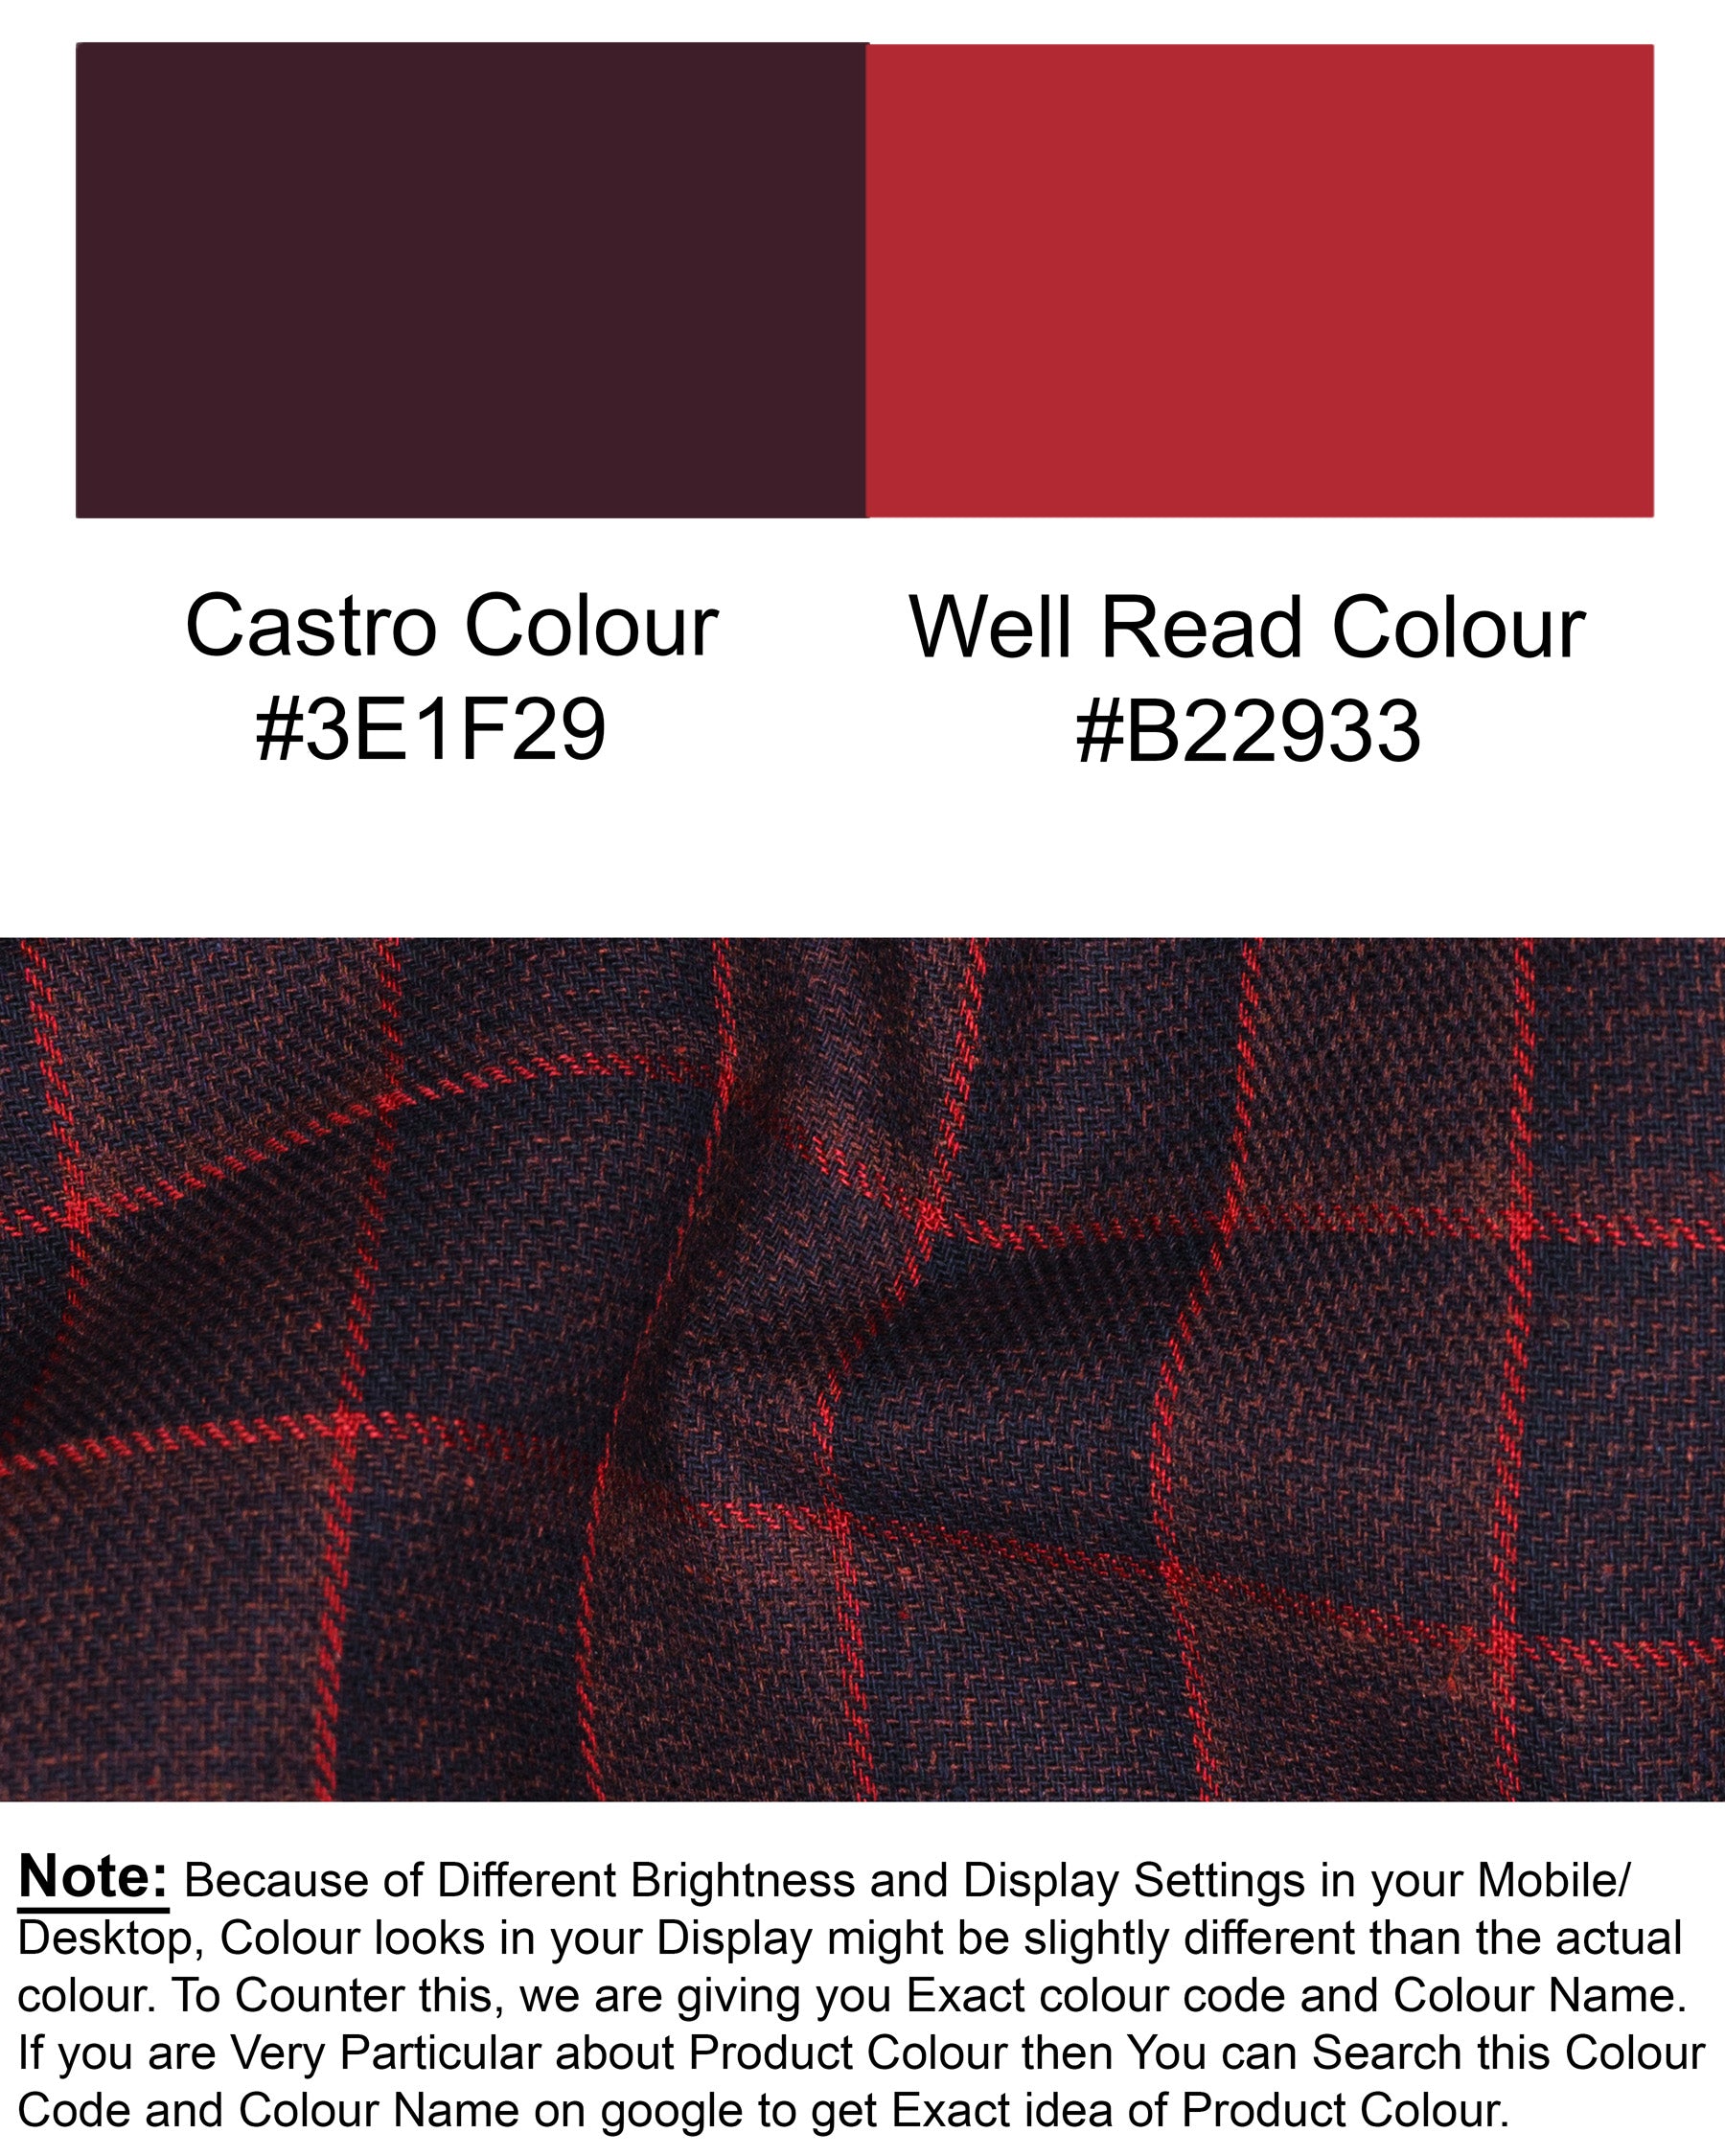 Castro and Well-Read windowpane DouSTe Breasted Premium Cotton Suit ST1450-DB-PP-36,ST1450-DB-PP-38,ST1450-DB-PP-40,ST1450-DB-PP-42,ST1450-DB-PP-44,ST1450-DB-PP-46,ST1450-DB-PP-48,ST1450-DB-PP-50,ST1450-DB-PP-52,ST1450-DB-PP-54,ST1450-DB-PP-56,ST1450-DB-PP-58,ST1450-DB-PP-60